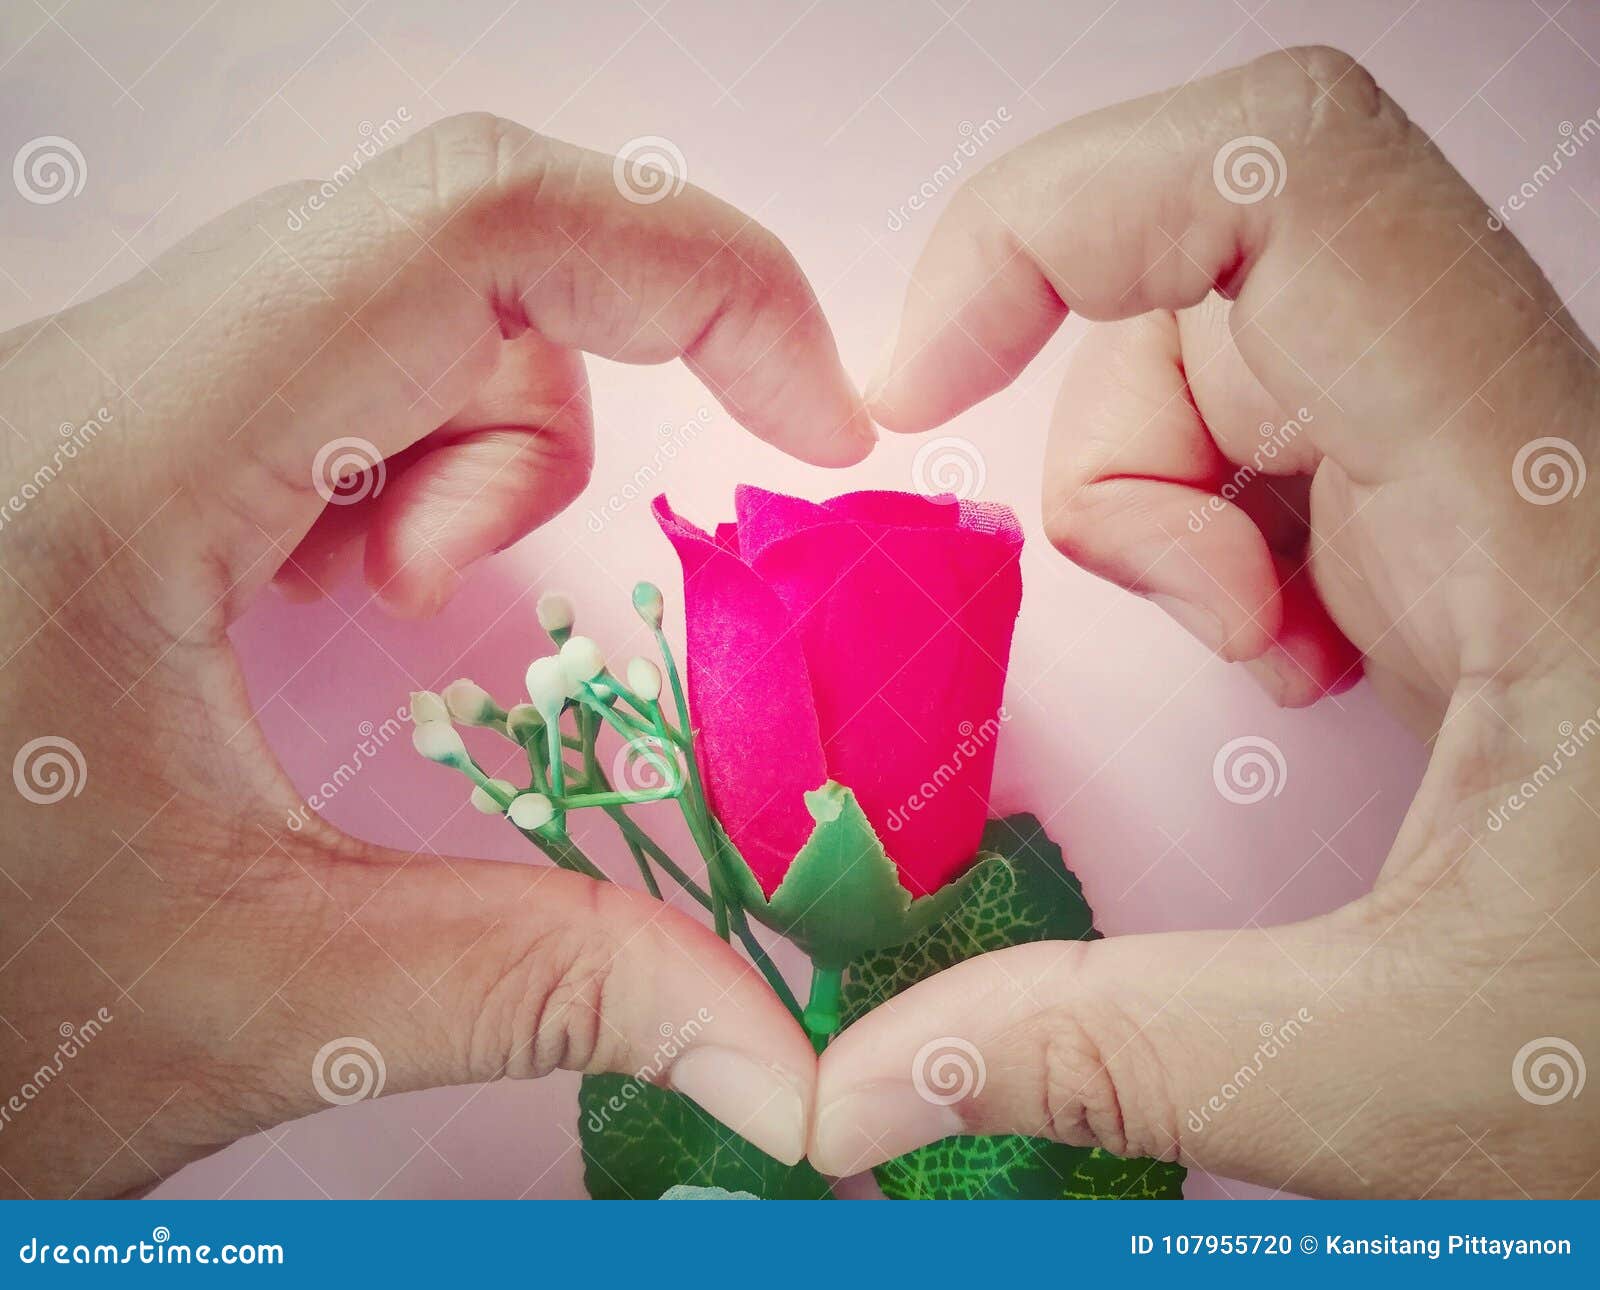 Create Hand Are Heart Shape Cover Rose Beautiful Wallpaper Valentine Day Stock Photo Image Of Background Love 107955720,Furniture Arrangement Rectangular Small Narrow Living Room Ideas